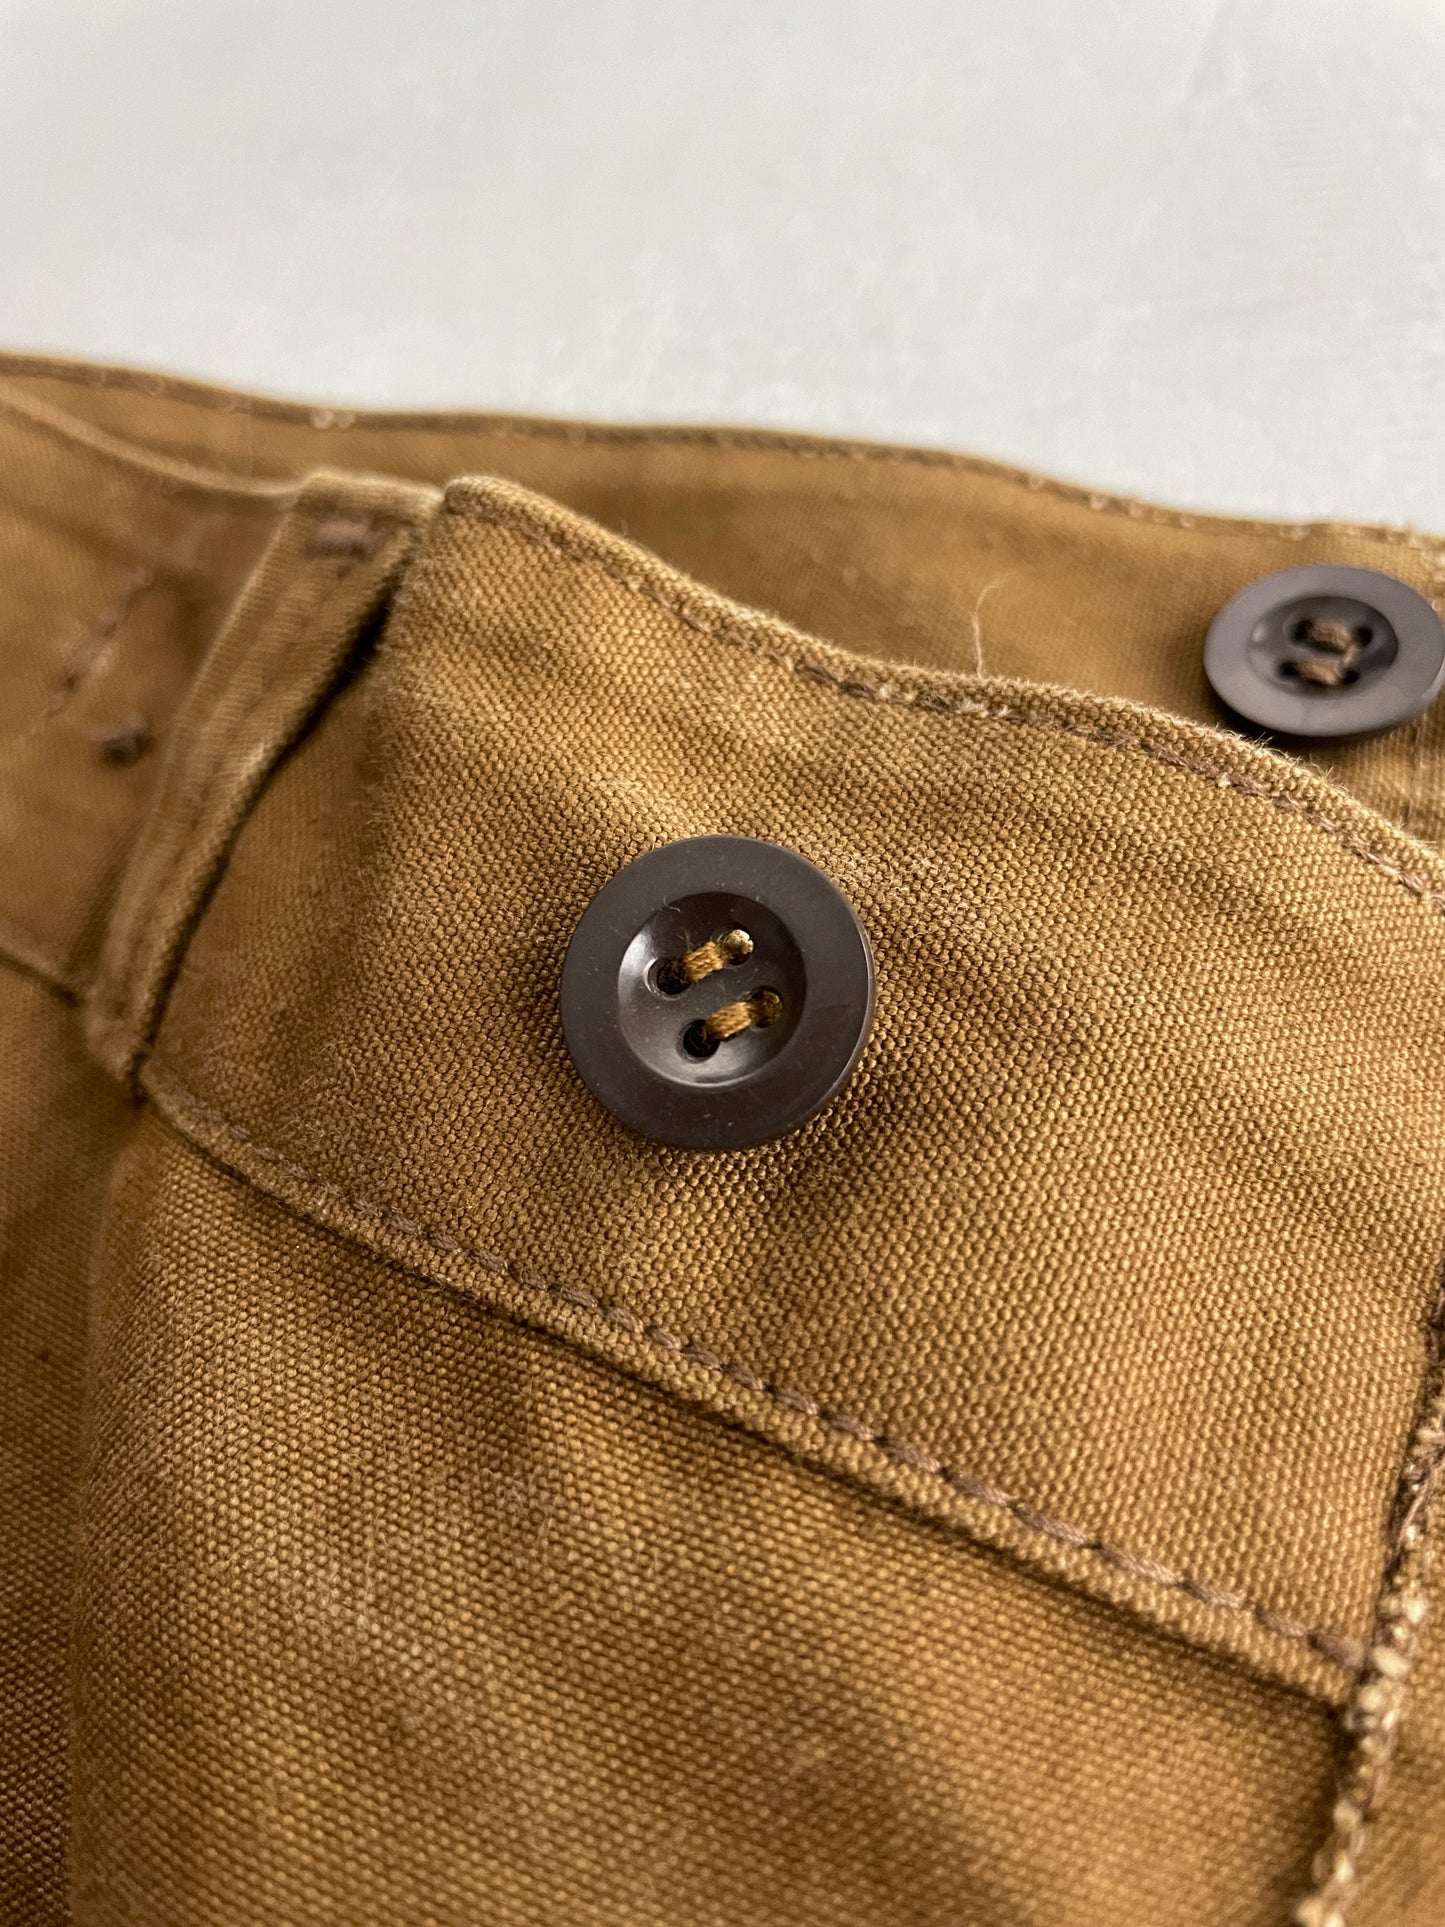 40's French Buckle-Back Rail-Road Pants [34"]